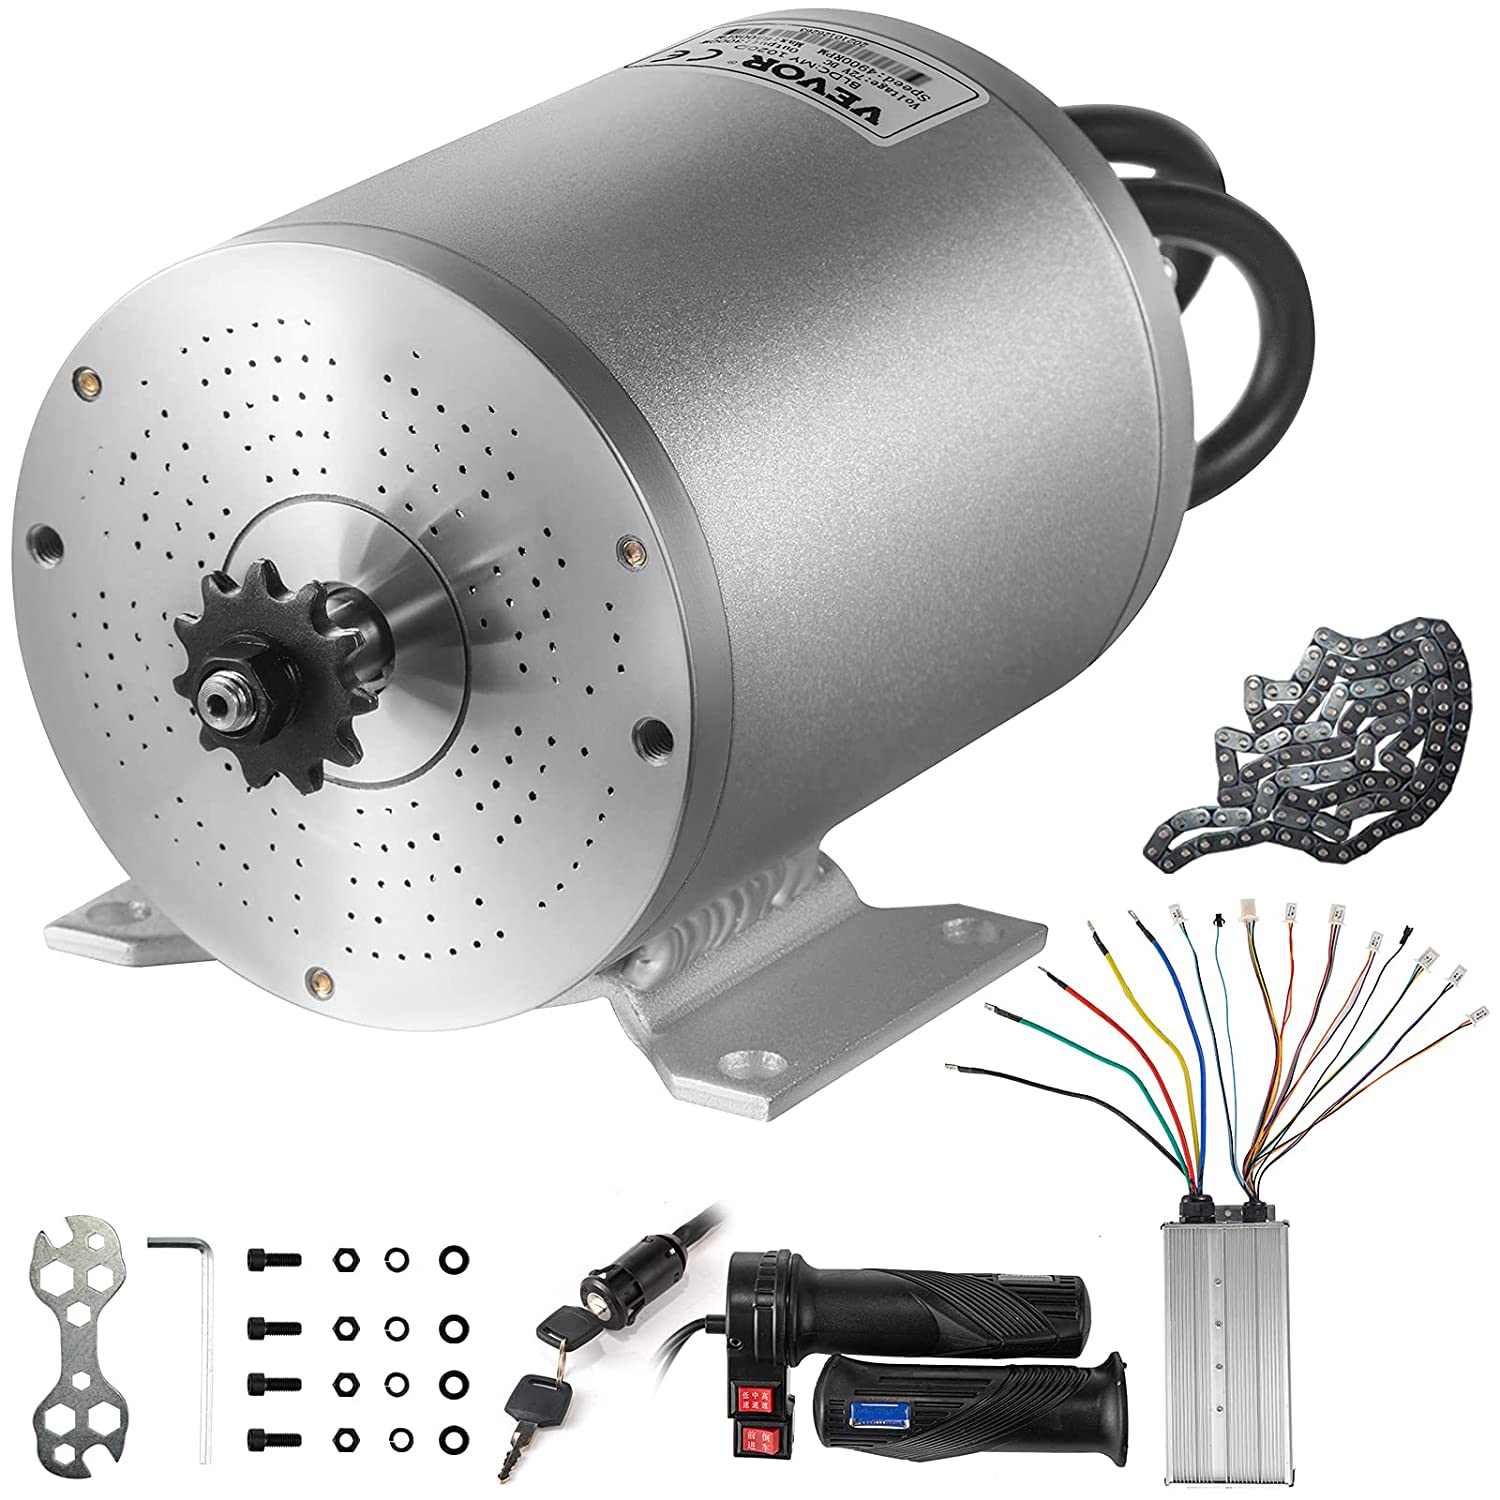 VEVOR Electric Brushless DC Motor,72V 3000W Brushless Electric Motor,4900RPM Brushless Motor Kit,wController and Throttle Grip for Electric Scooter E Bike Engine Motorcycle DIY Part Conversion Kit